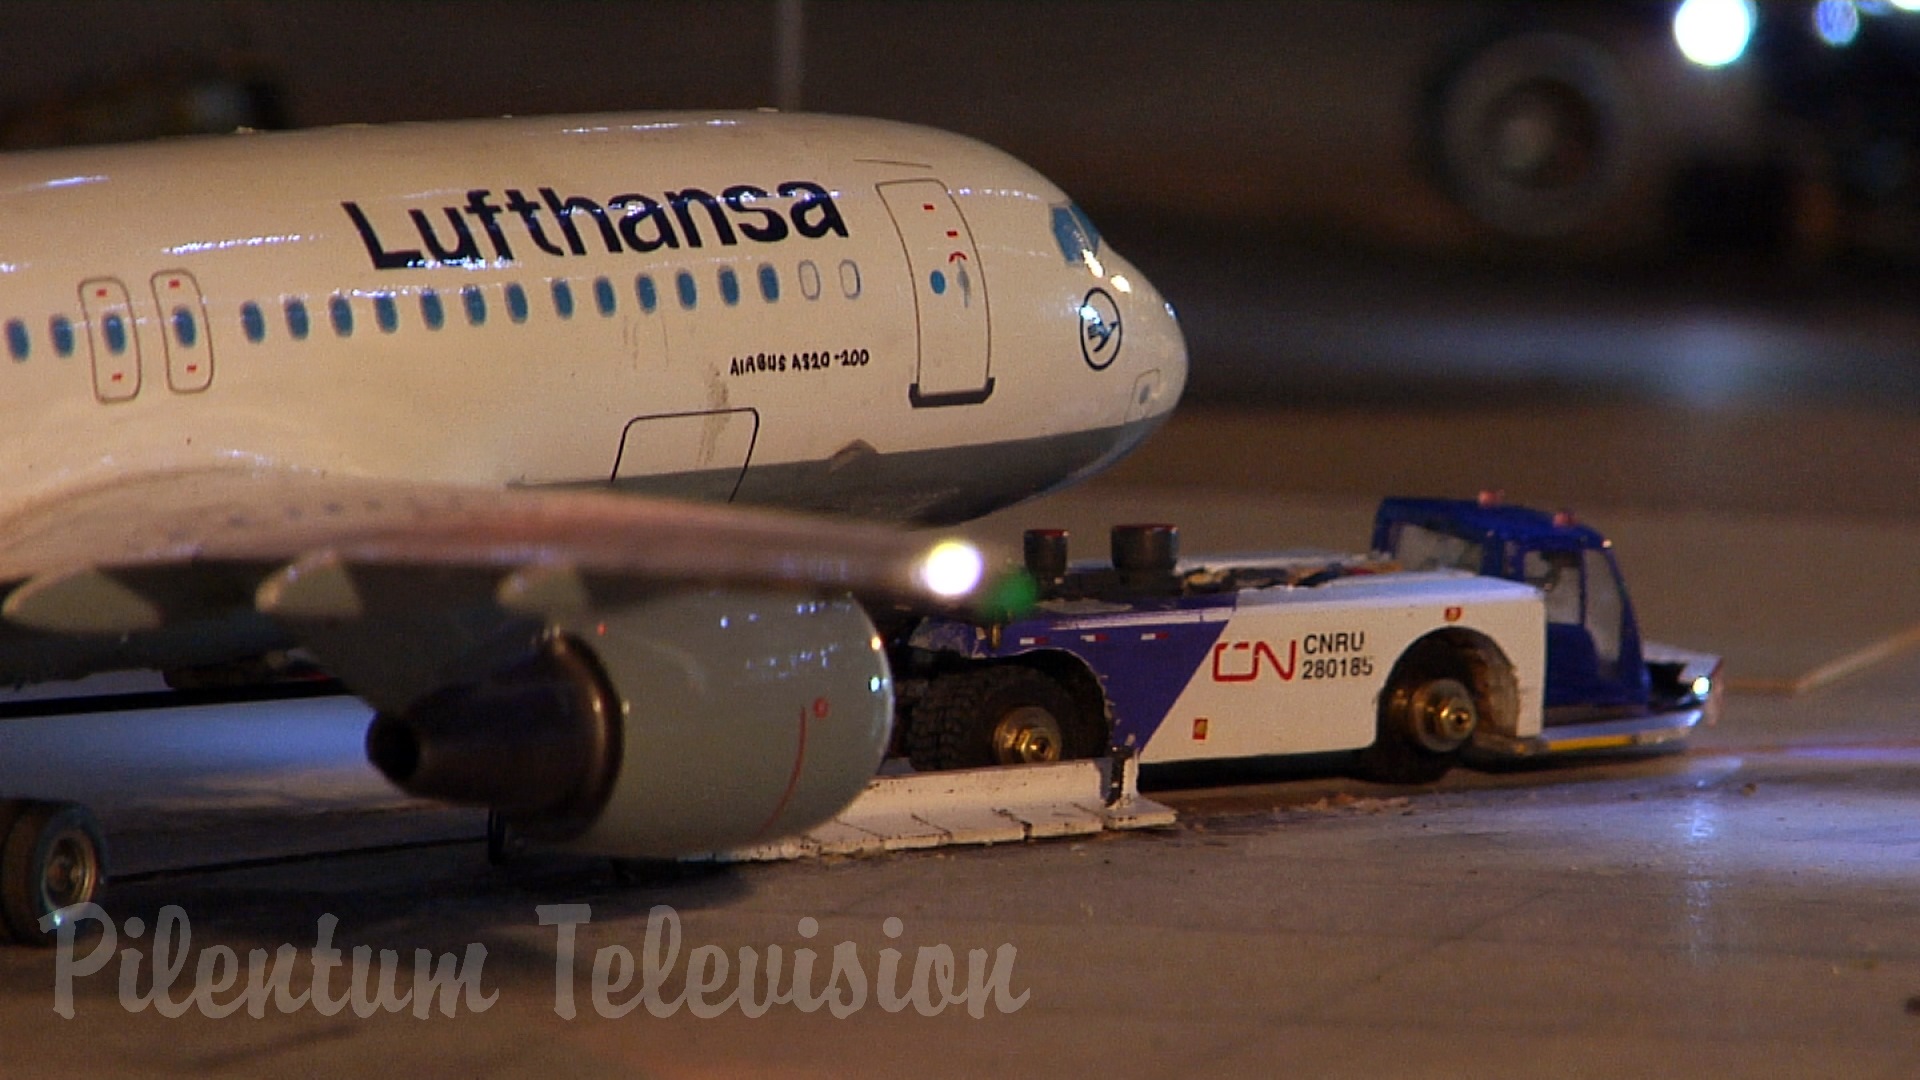 Lufthansa Model Airport and Apron Traffic in HO scale